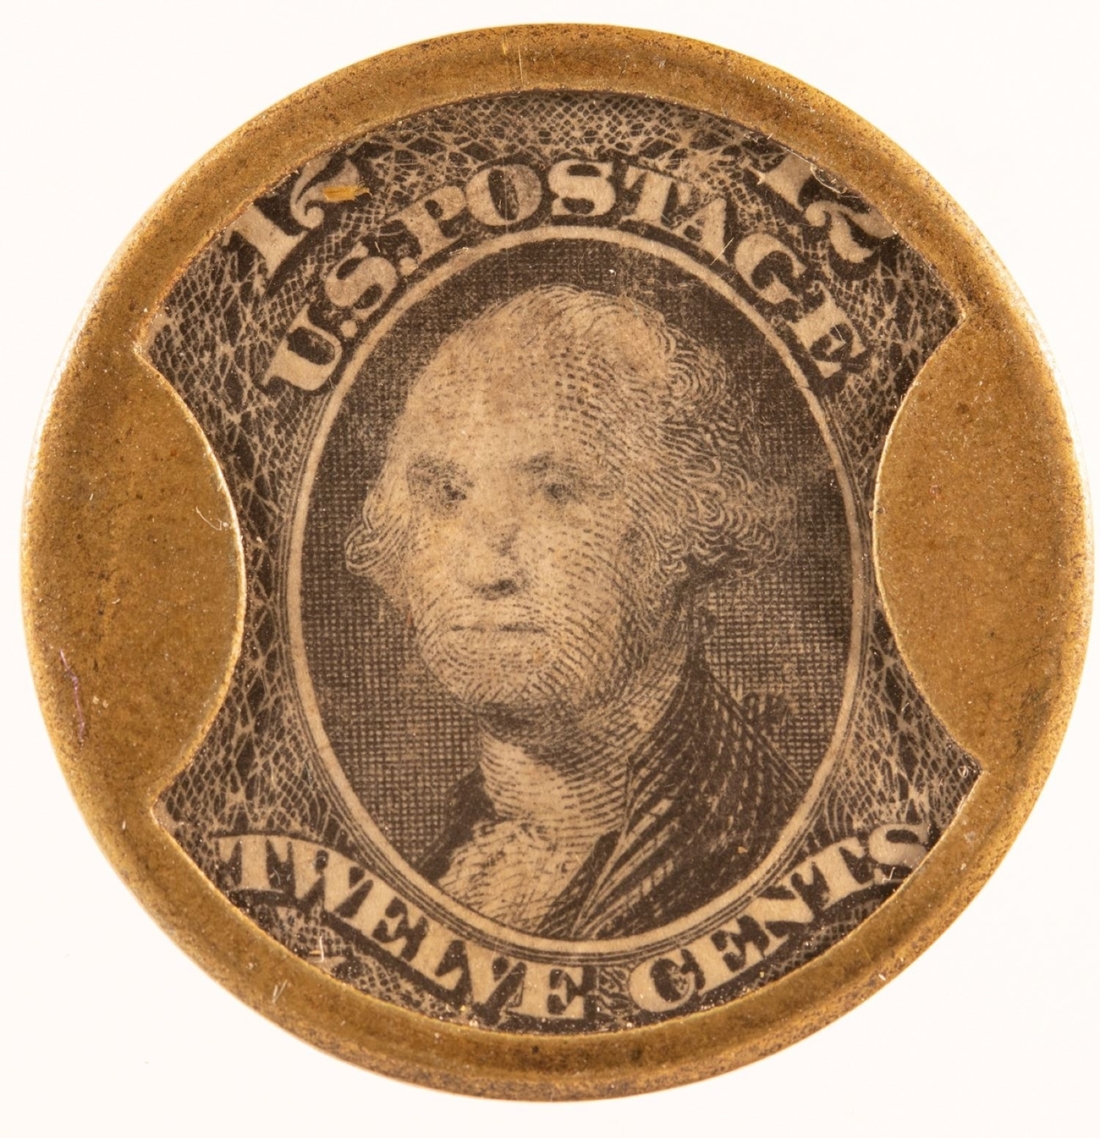 Early U.S. 12-cent postage stamp with a portrait bust of George Washington, $19,520